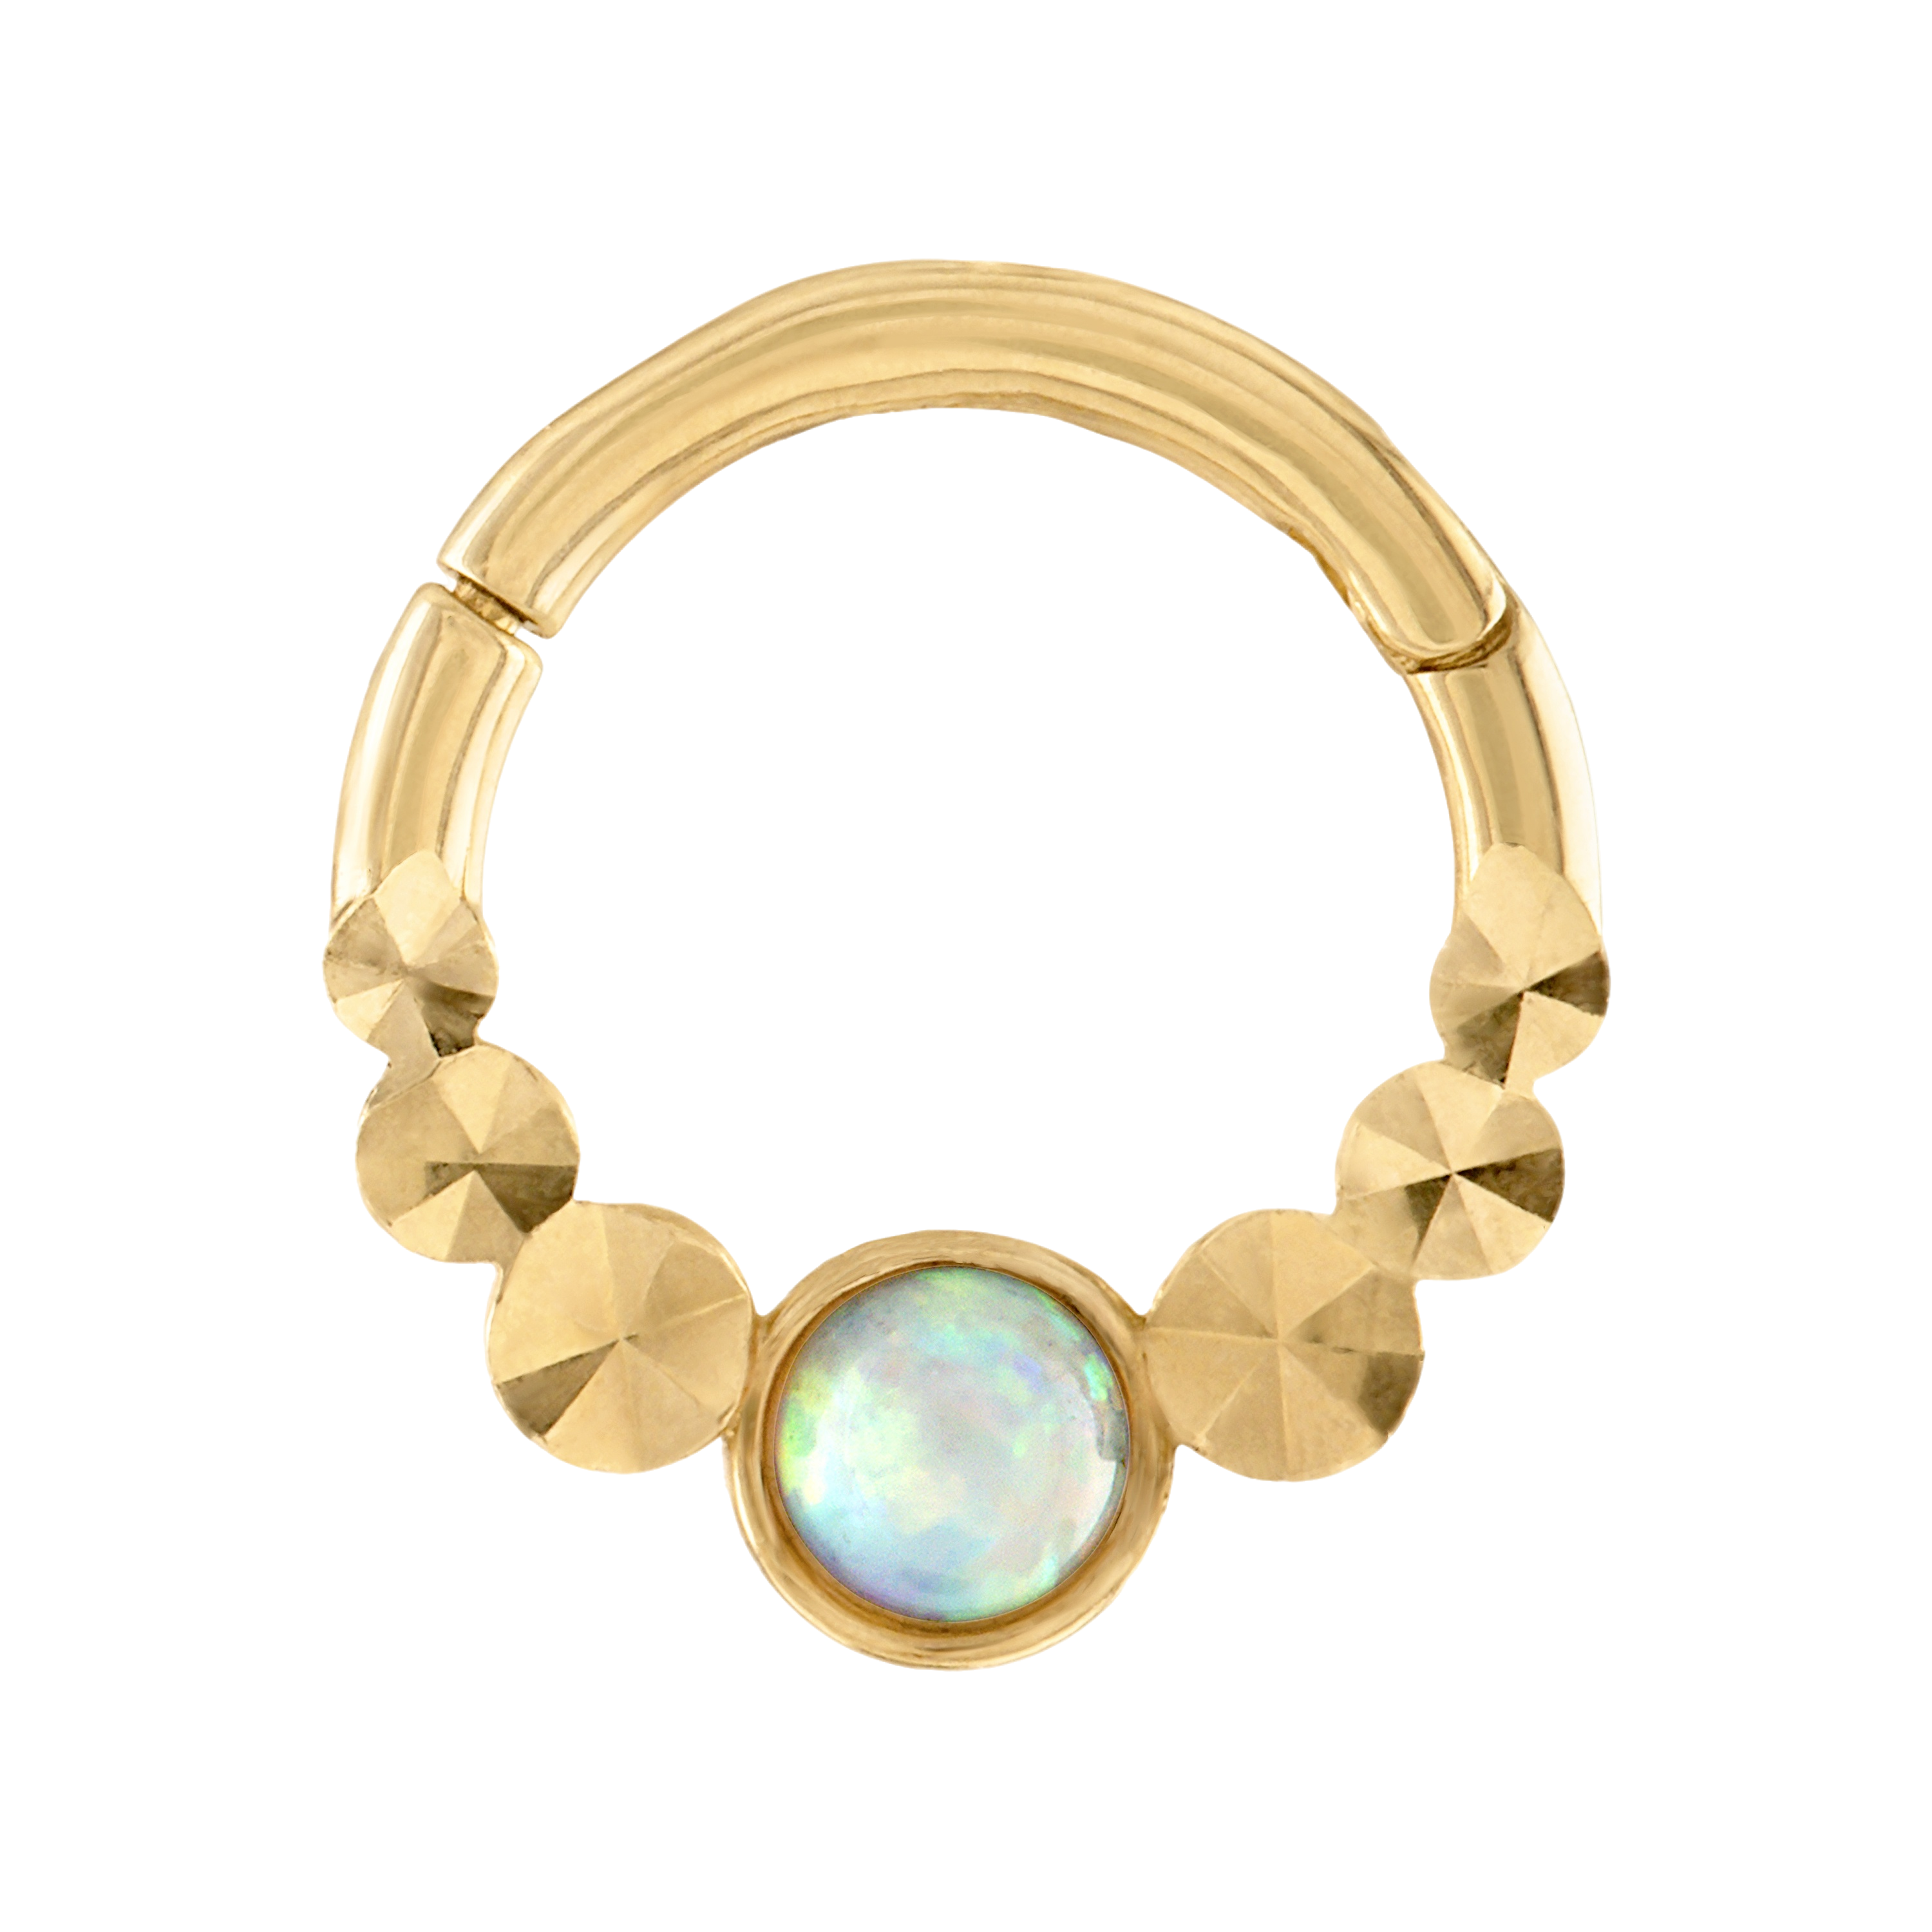 10K Solid Gold Septum Clicker With Opal Stone